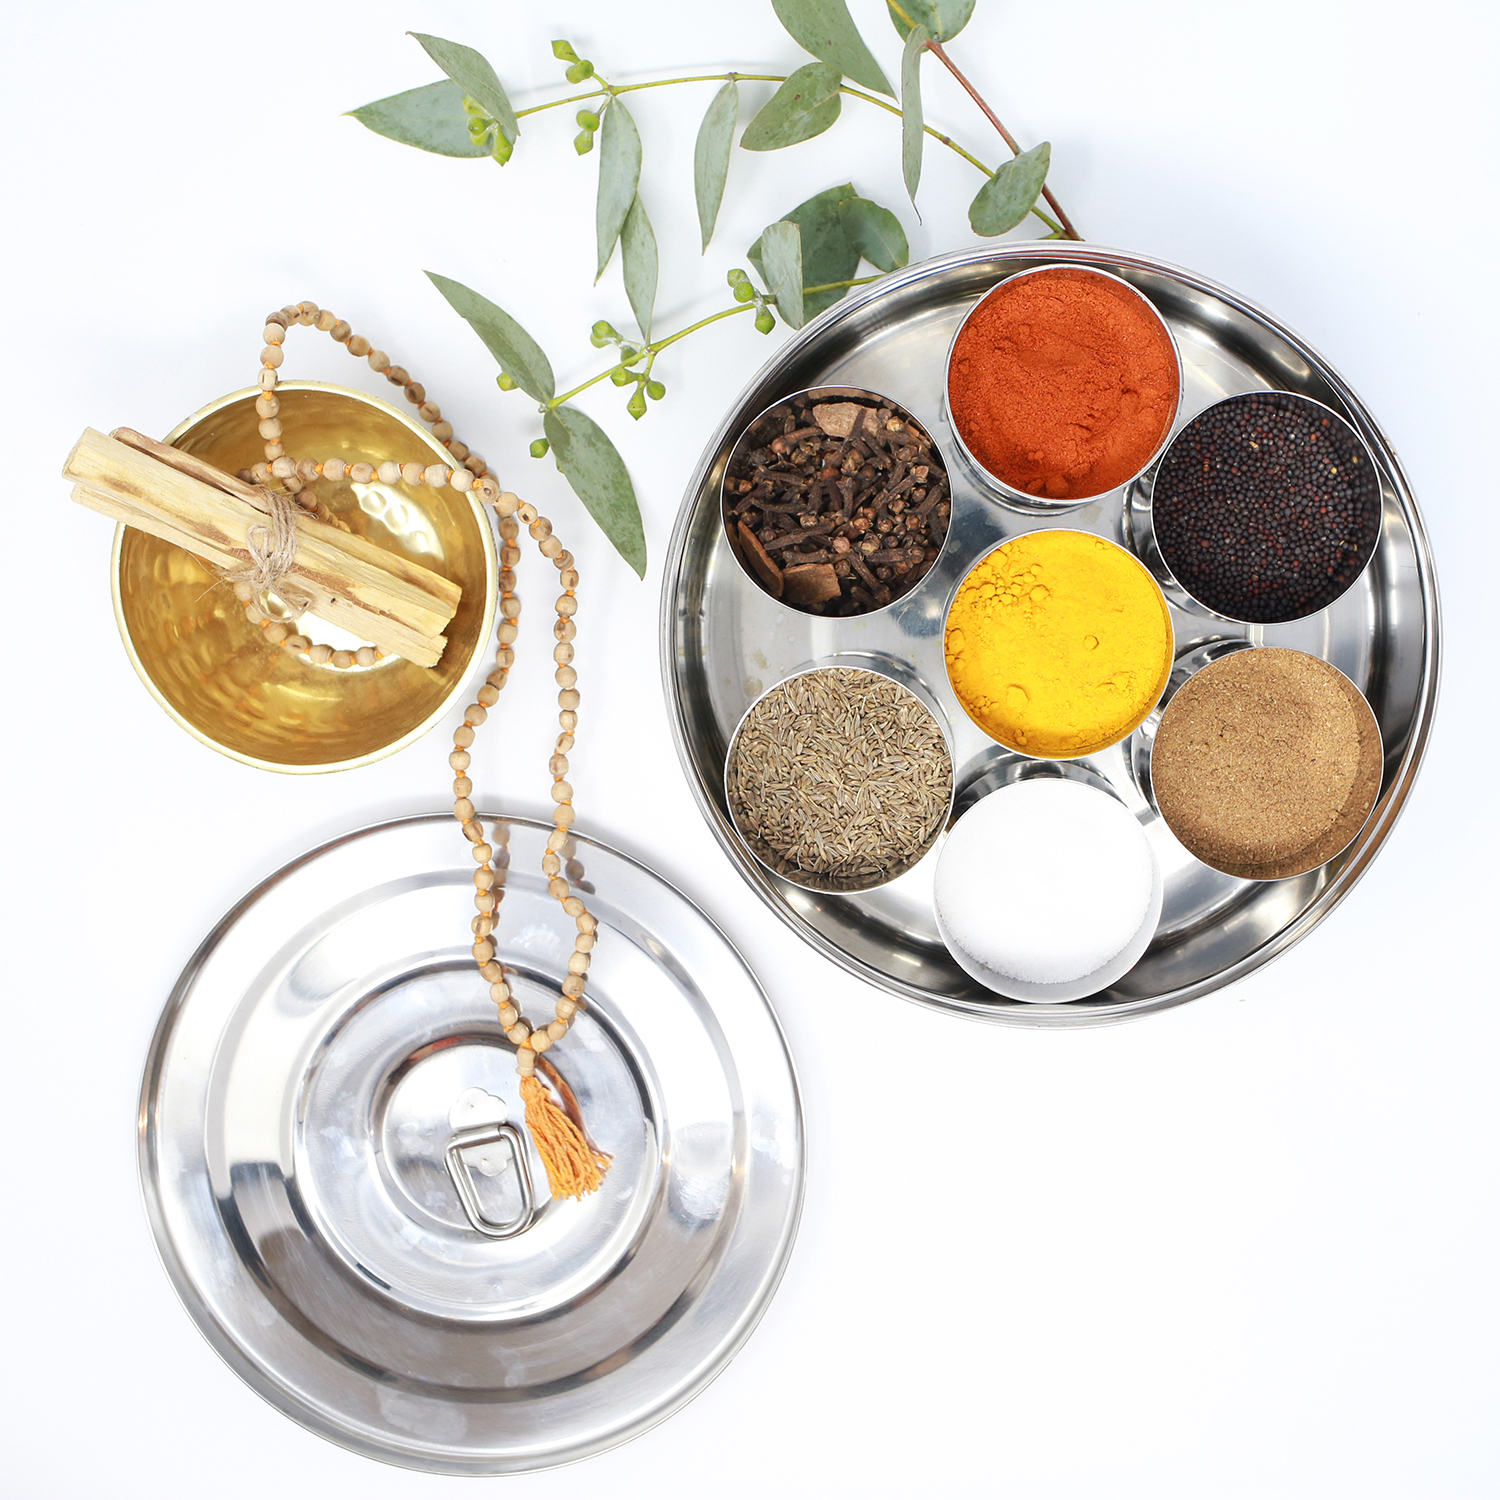 Basic Indian Spices, All About Spices Benefits, Indian Traditional Masala  Box